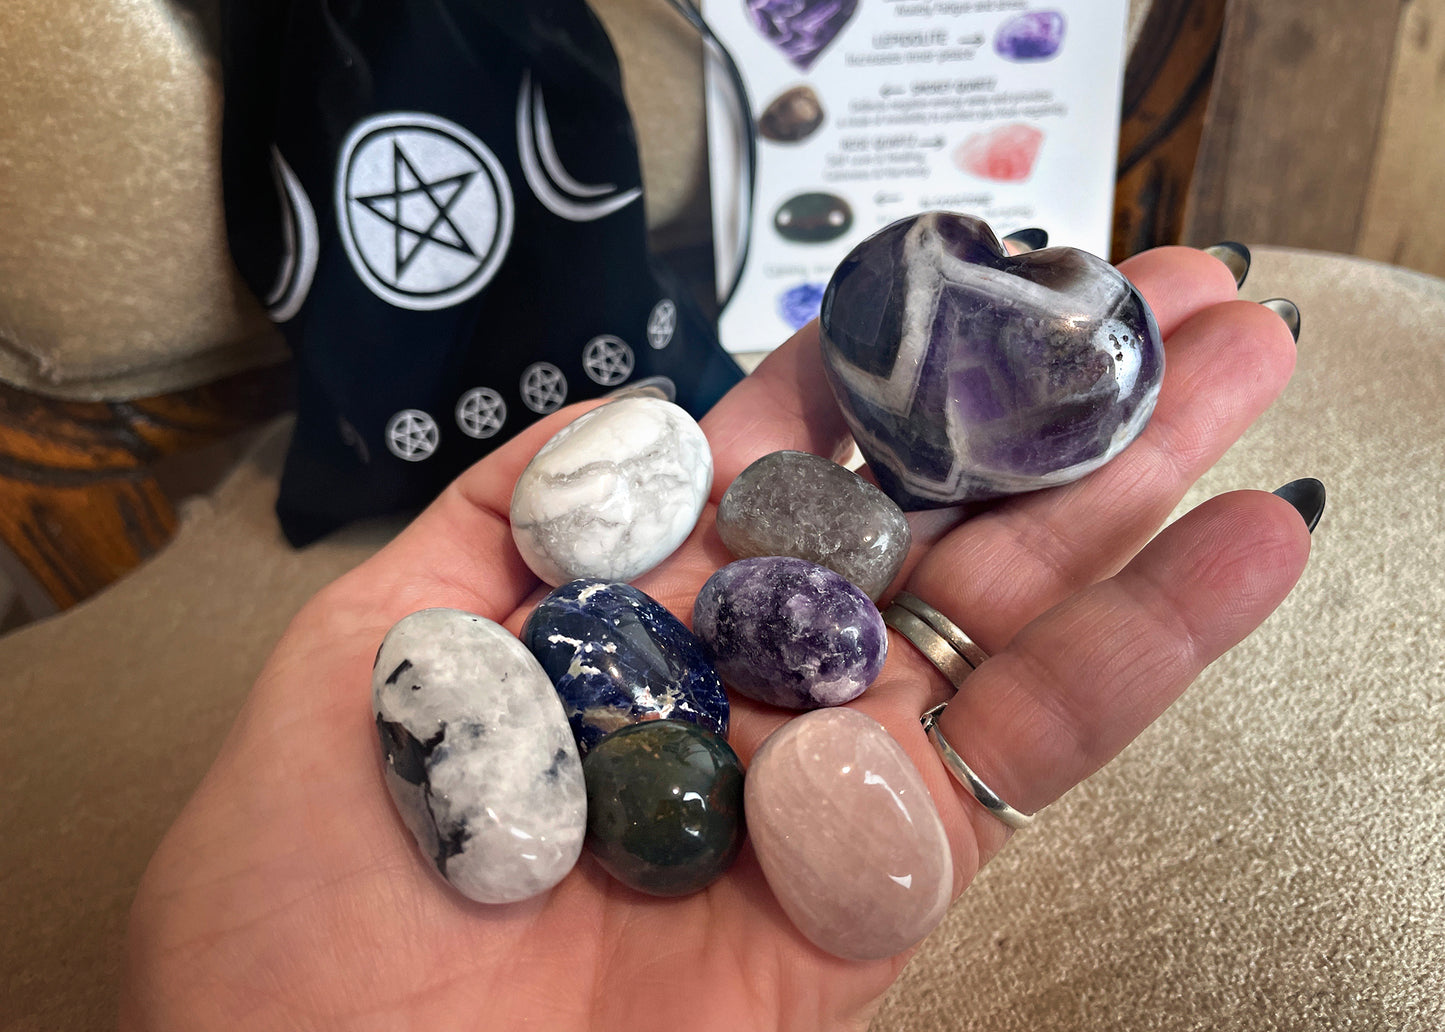 Anxiety & Calming Gemstone Gift Set of Eight